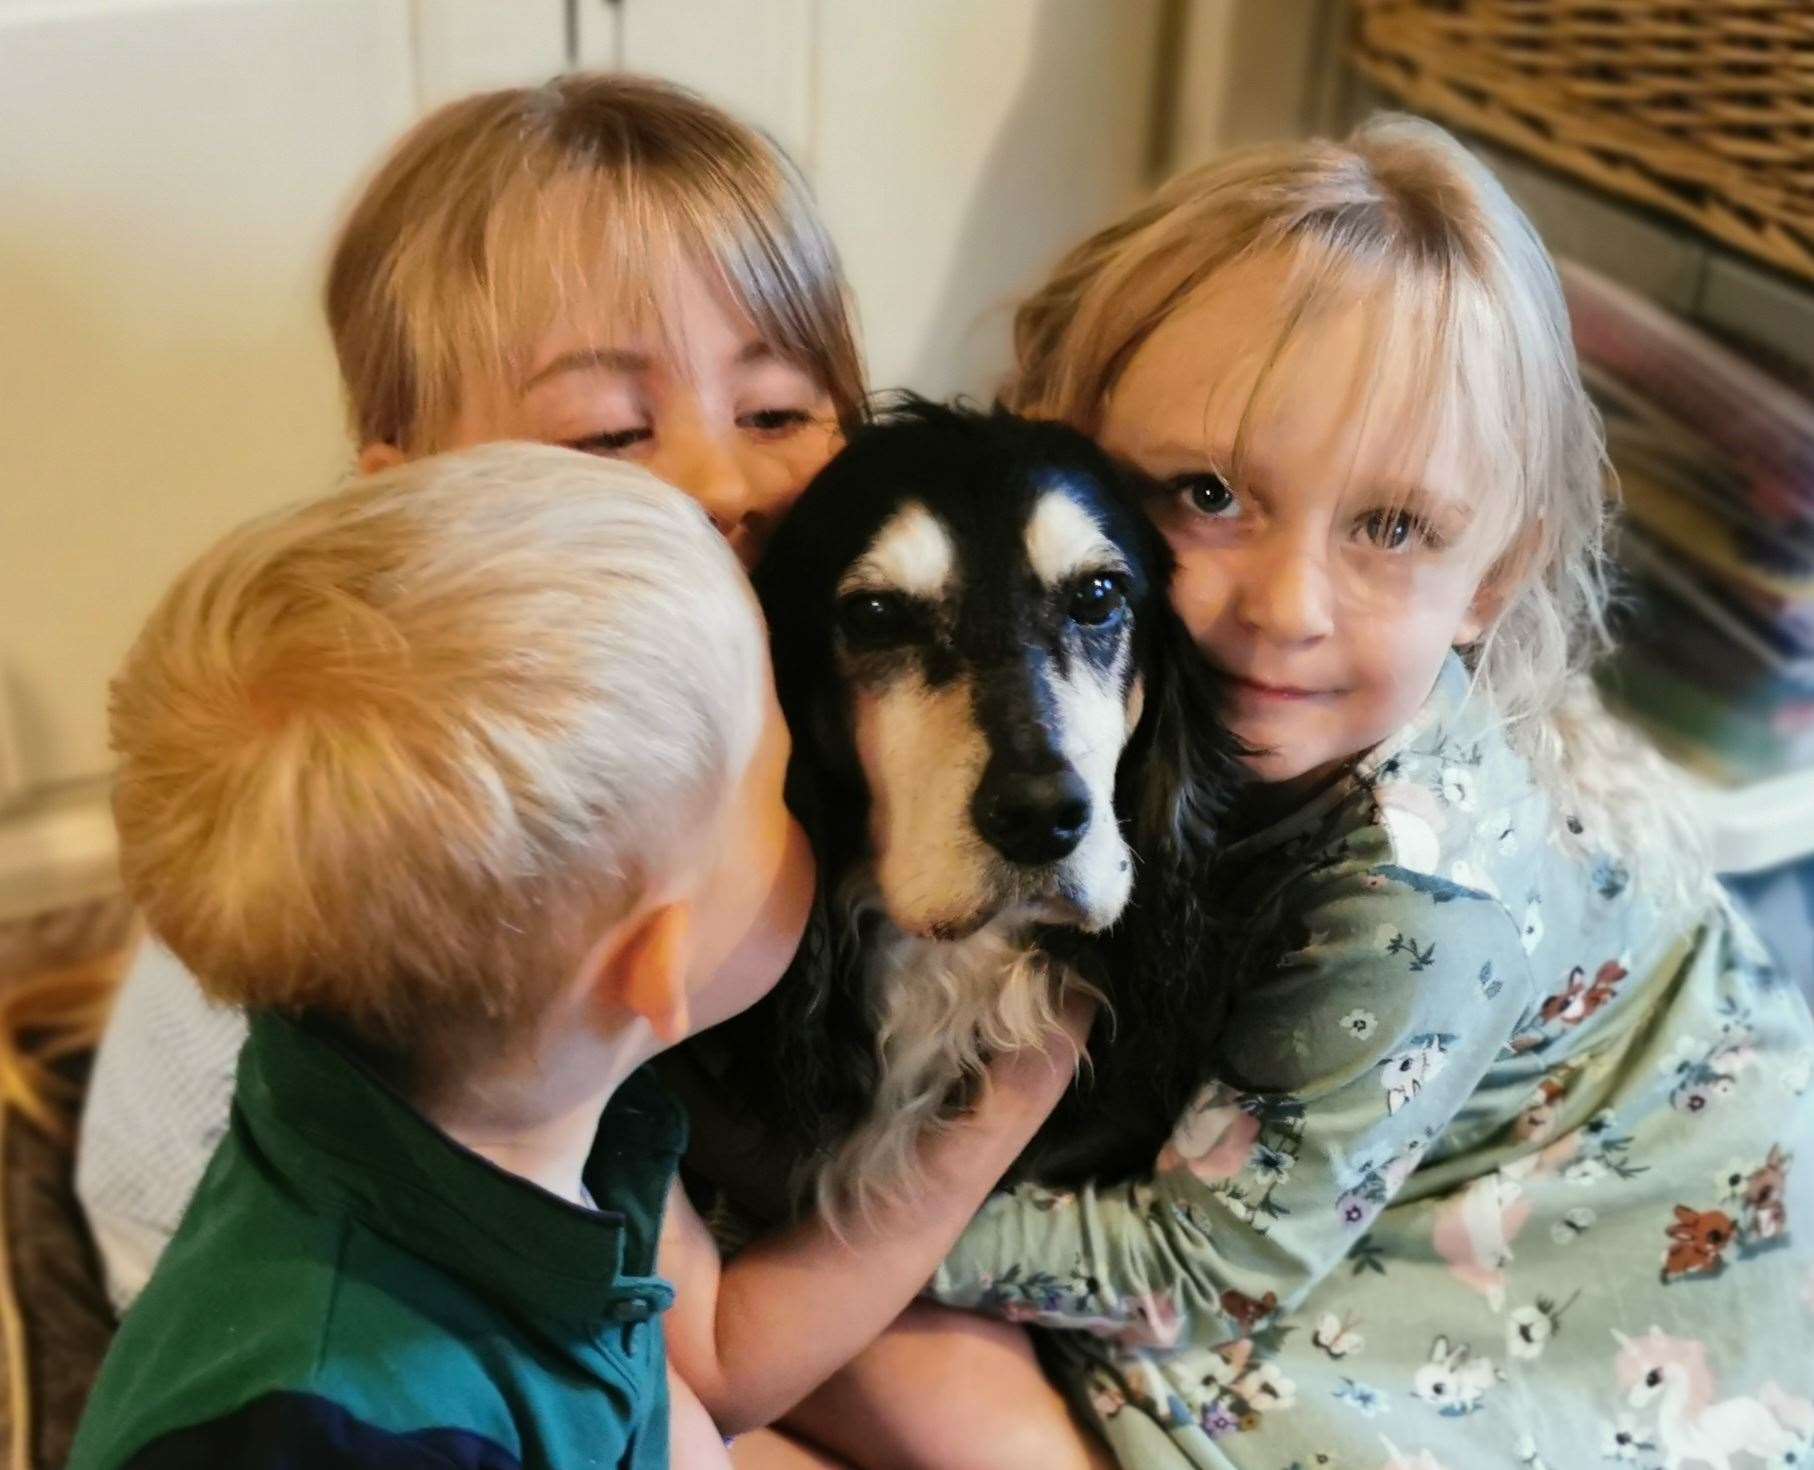 Cocker spaniel Lucy is safely back home where she belongs